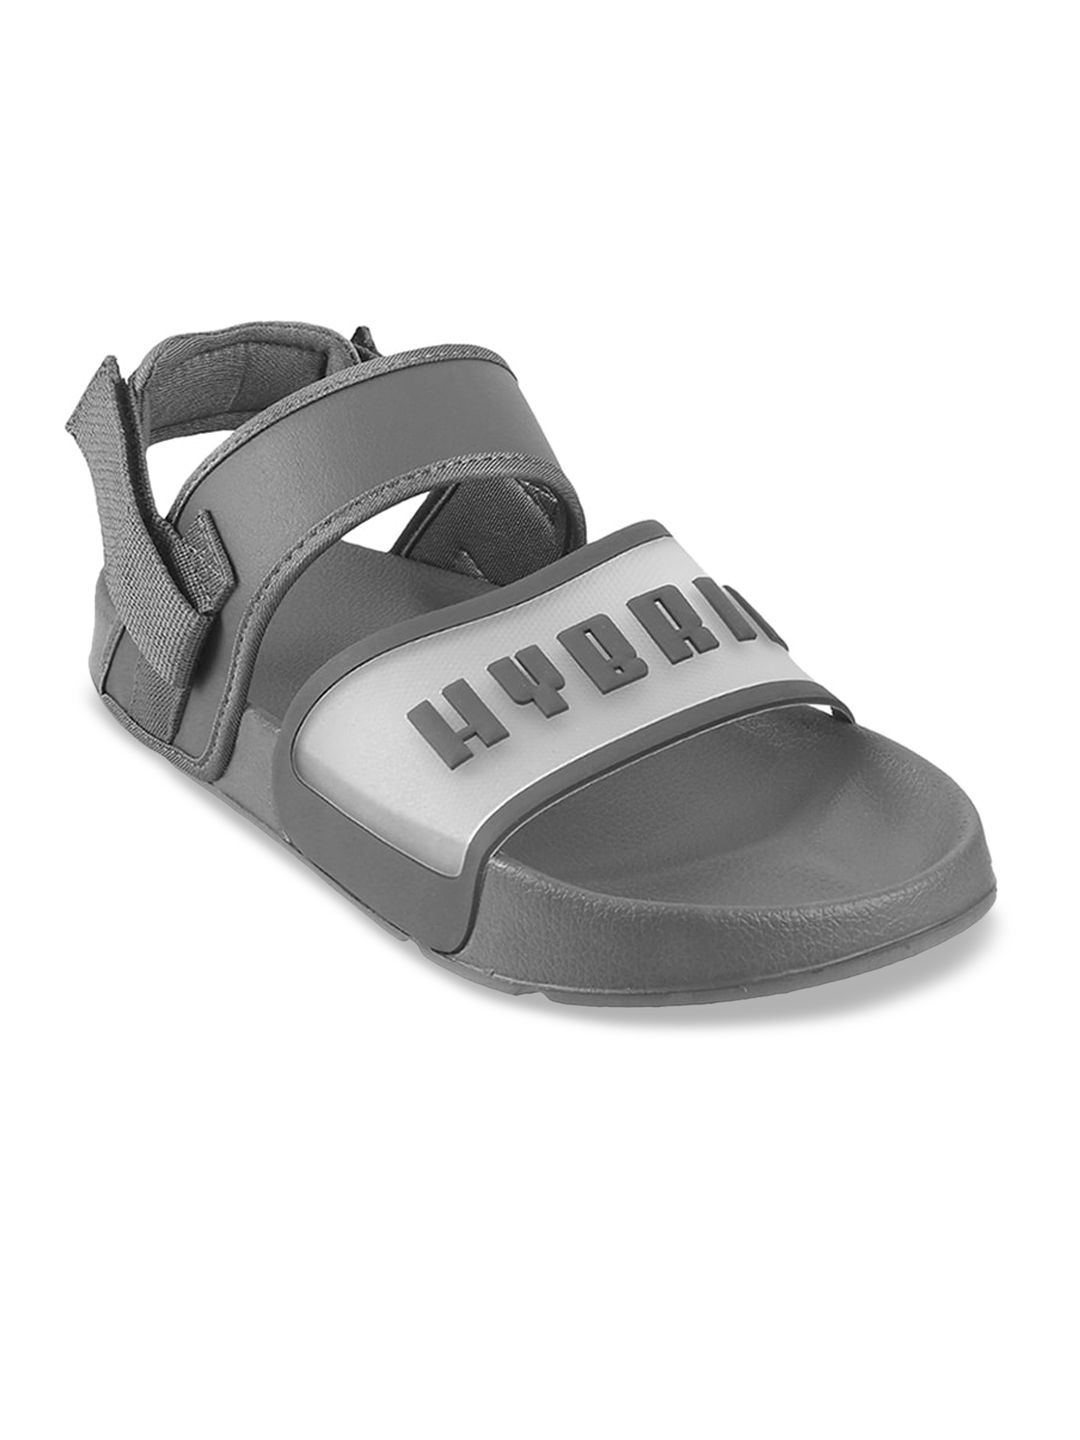 Vento Unisex Grey Solid Sports Sandals Price in India